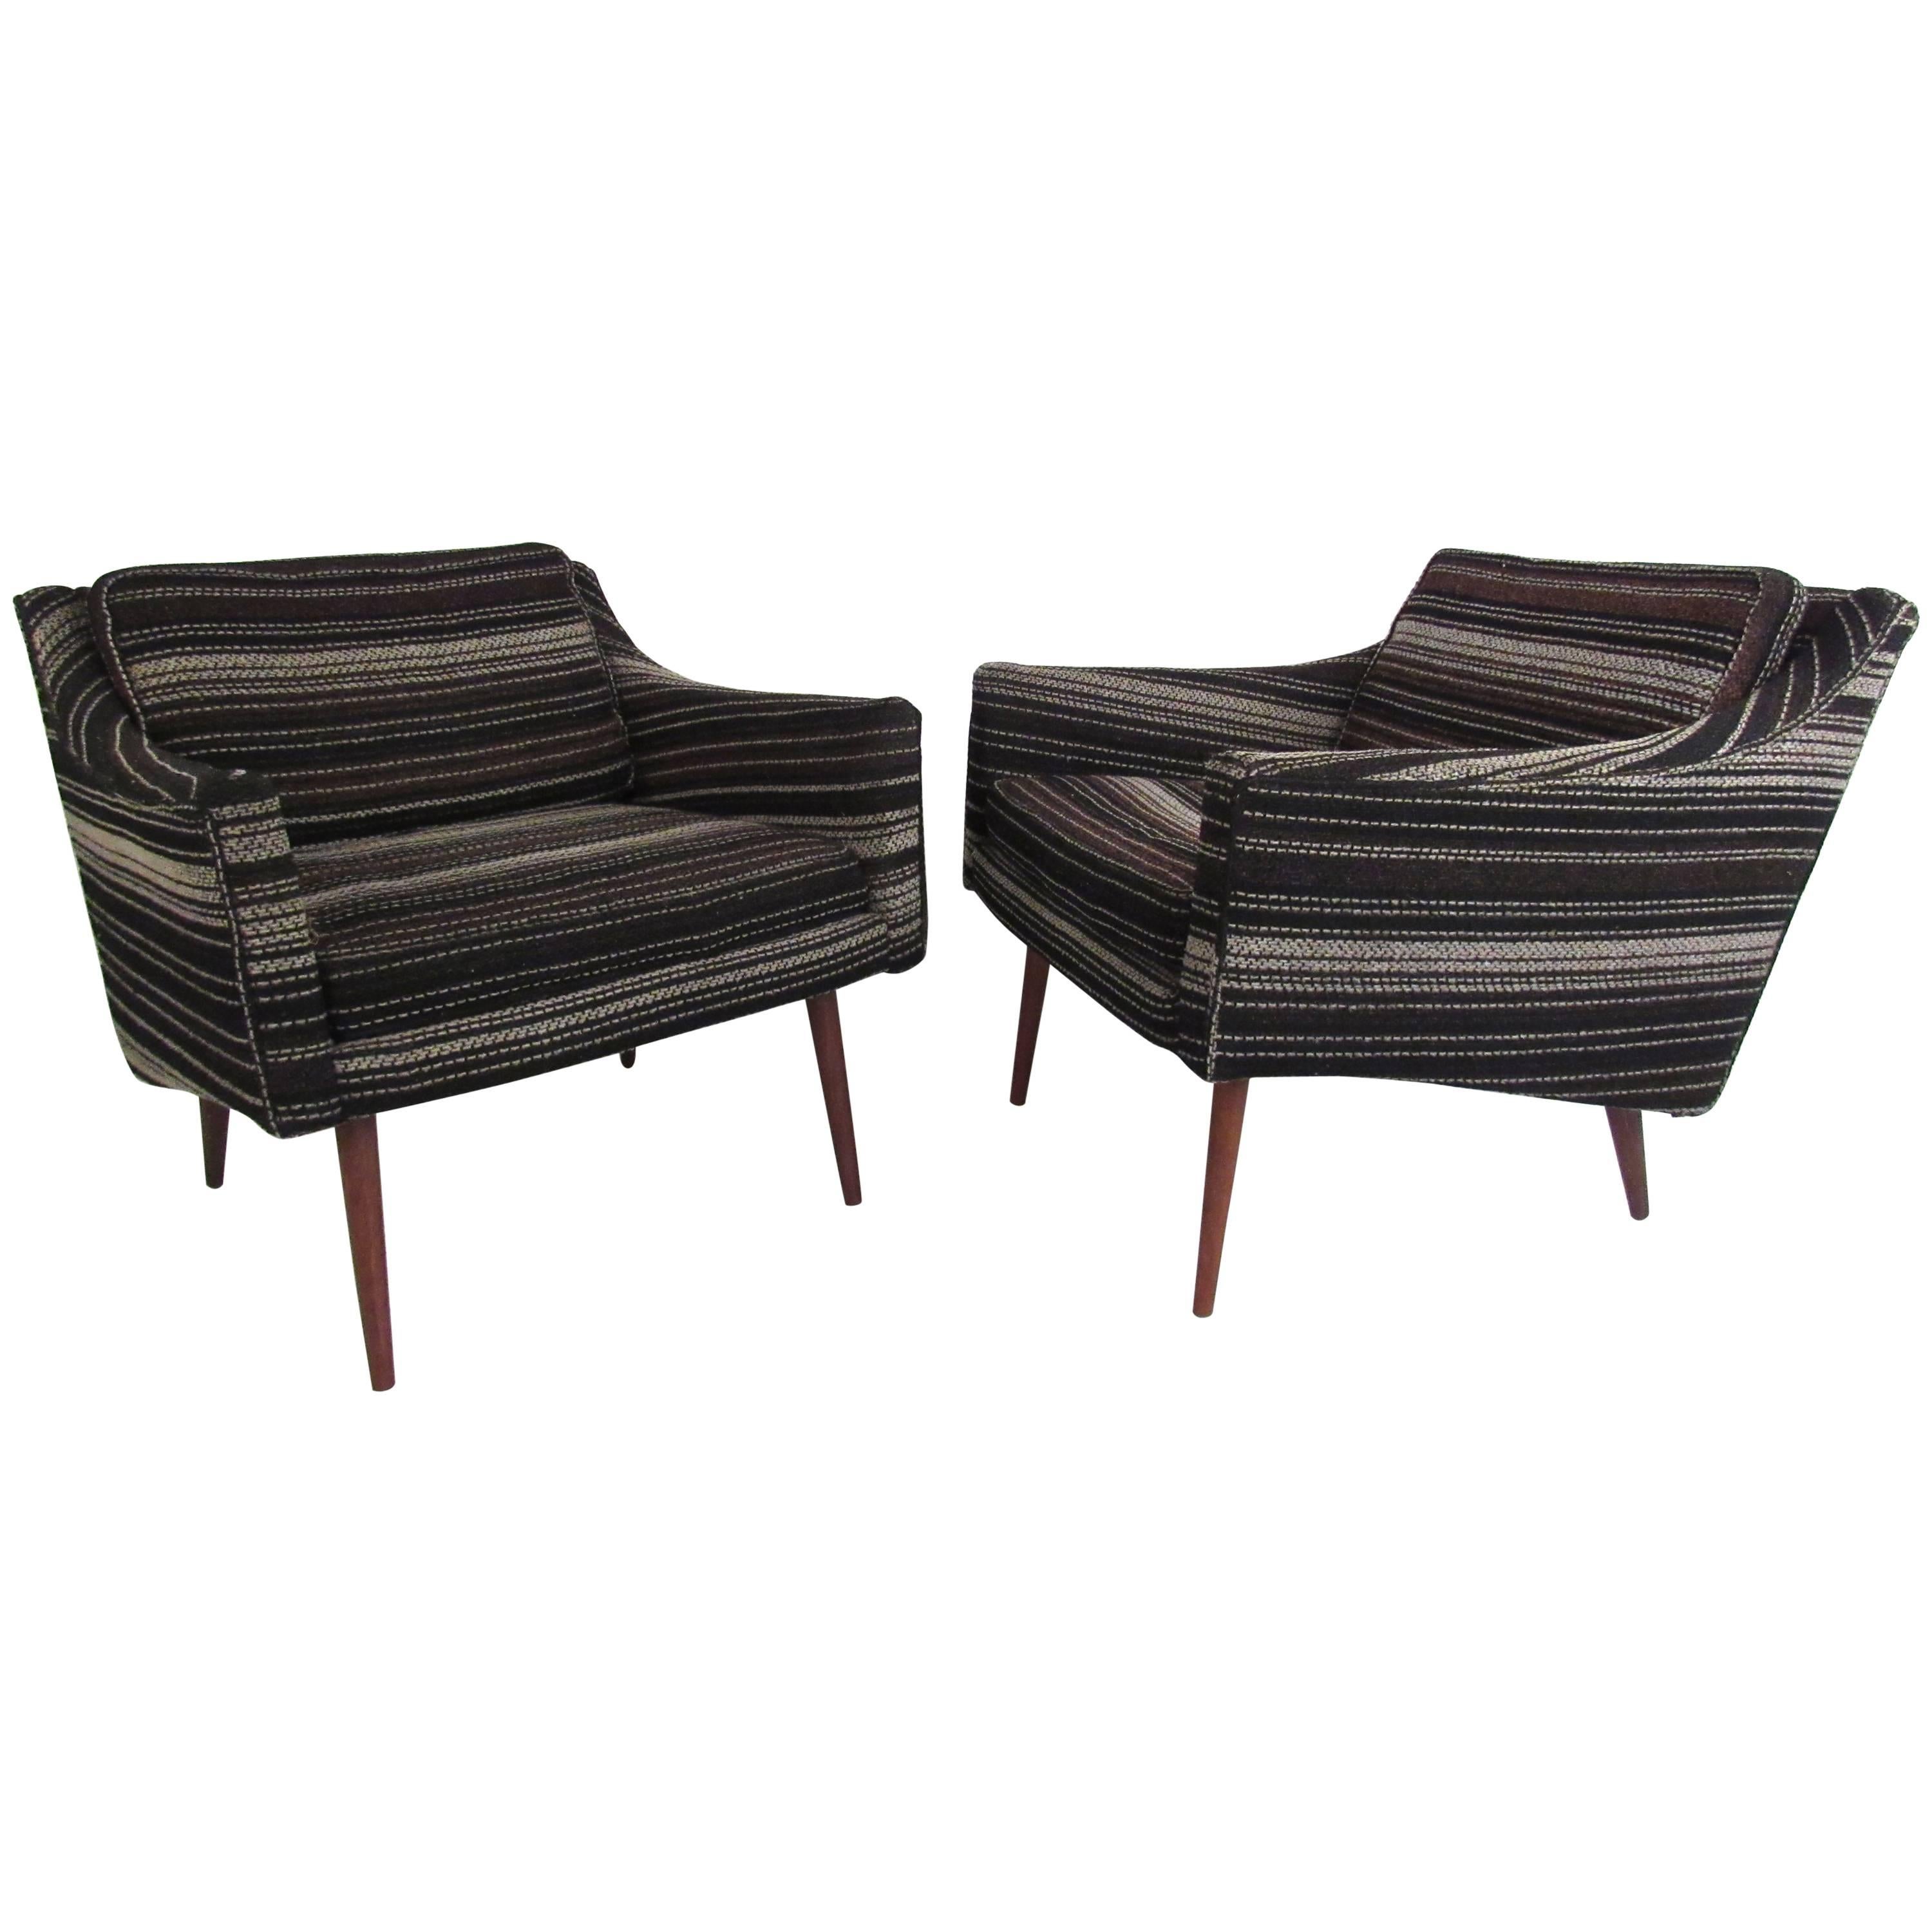 Stylish Pair of Vintage Modern Lounge Chairs